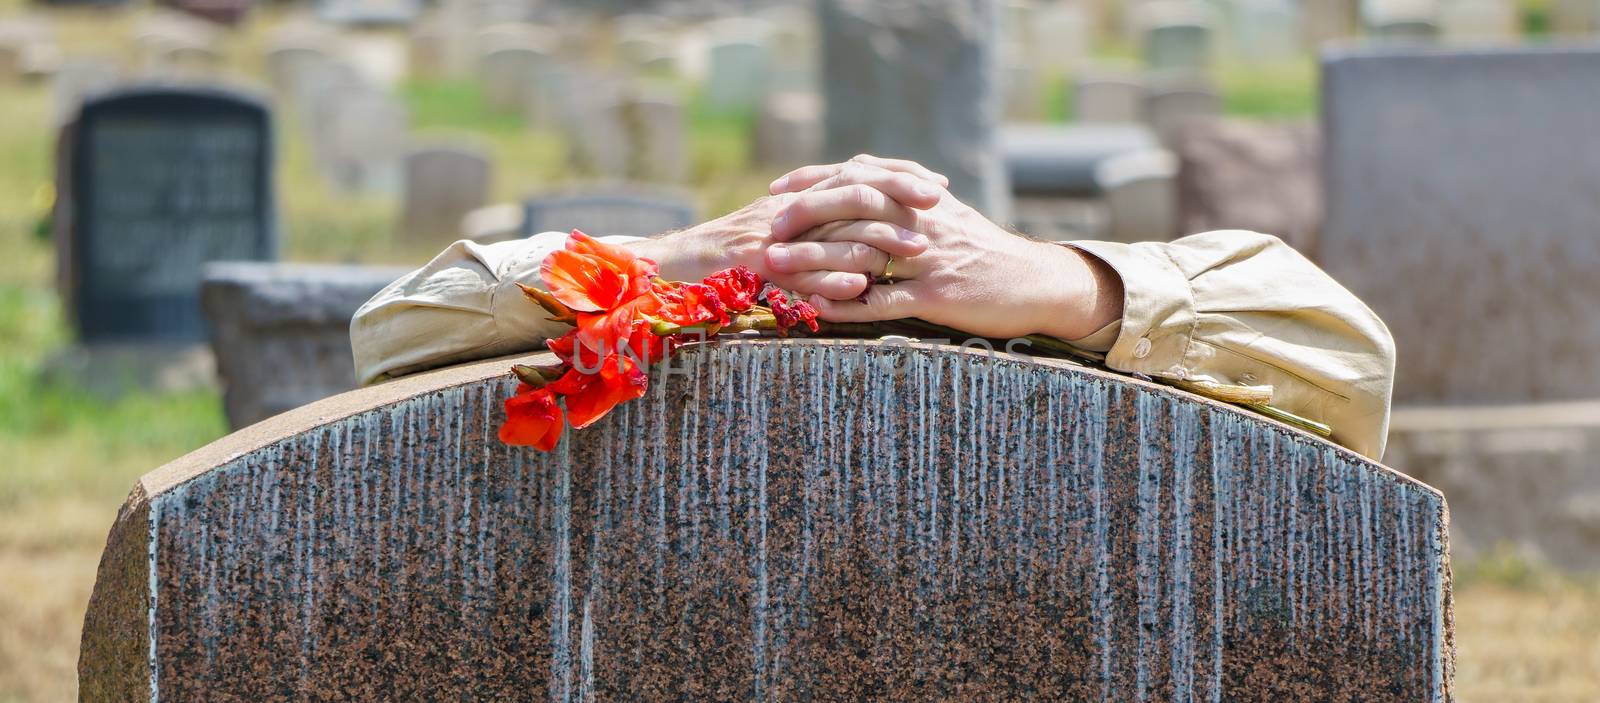 Lone figure of person's hands grieving at cemetery